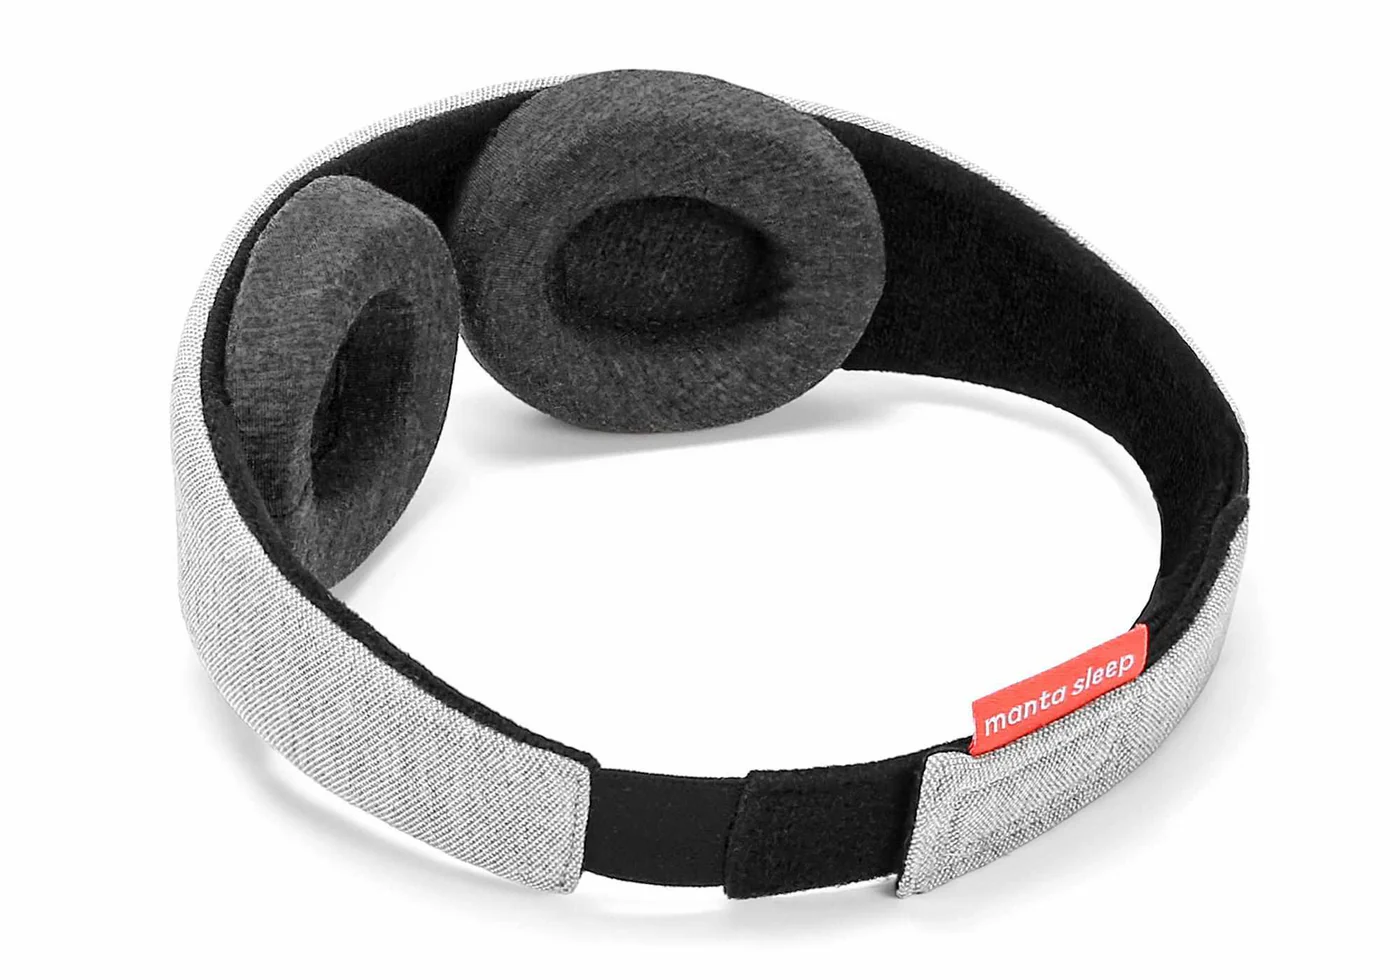 Dark gray convex eye cups attached to the black interior of a sleep mask.